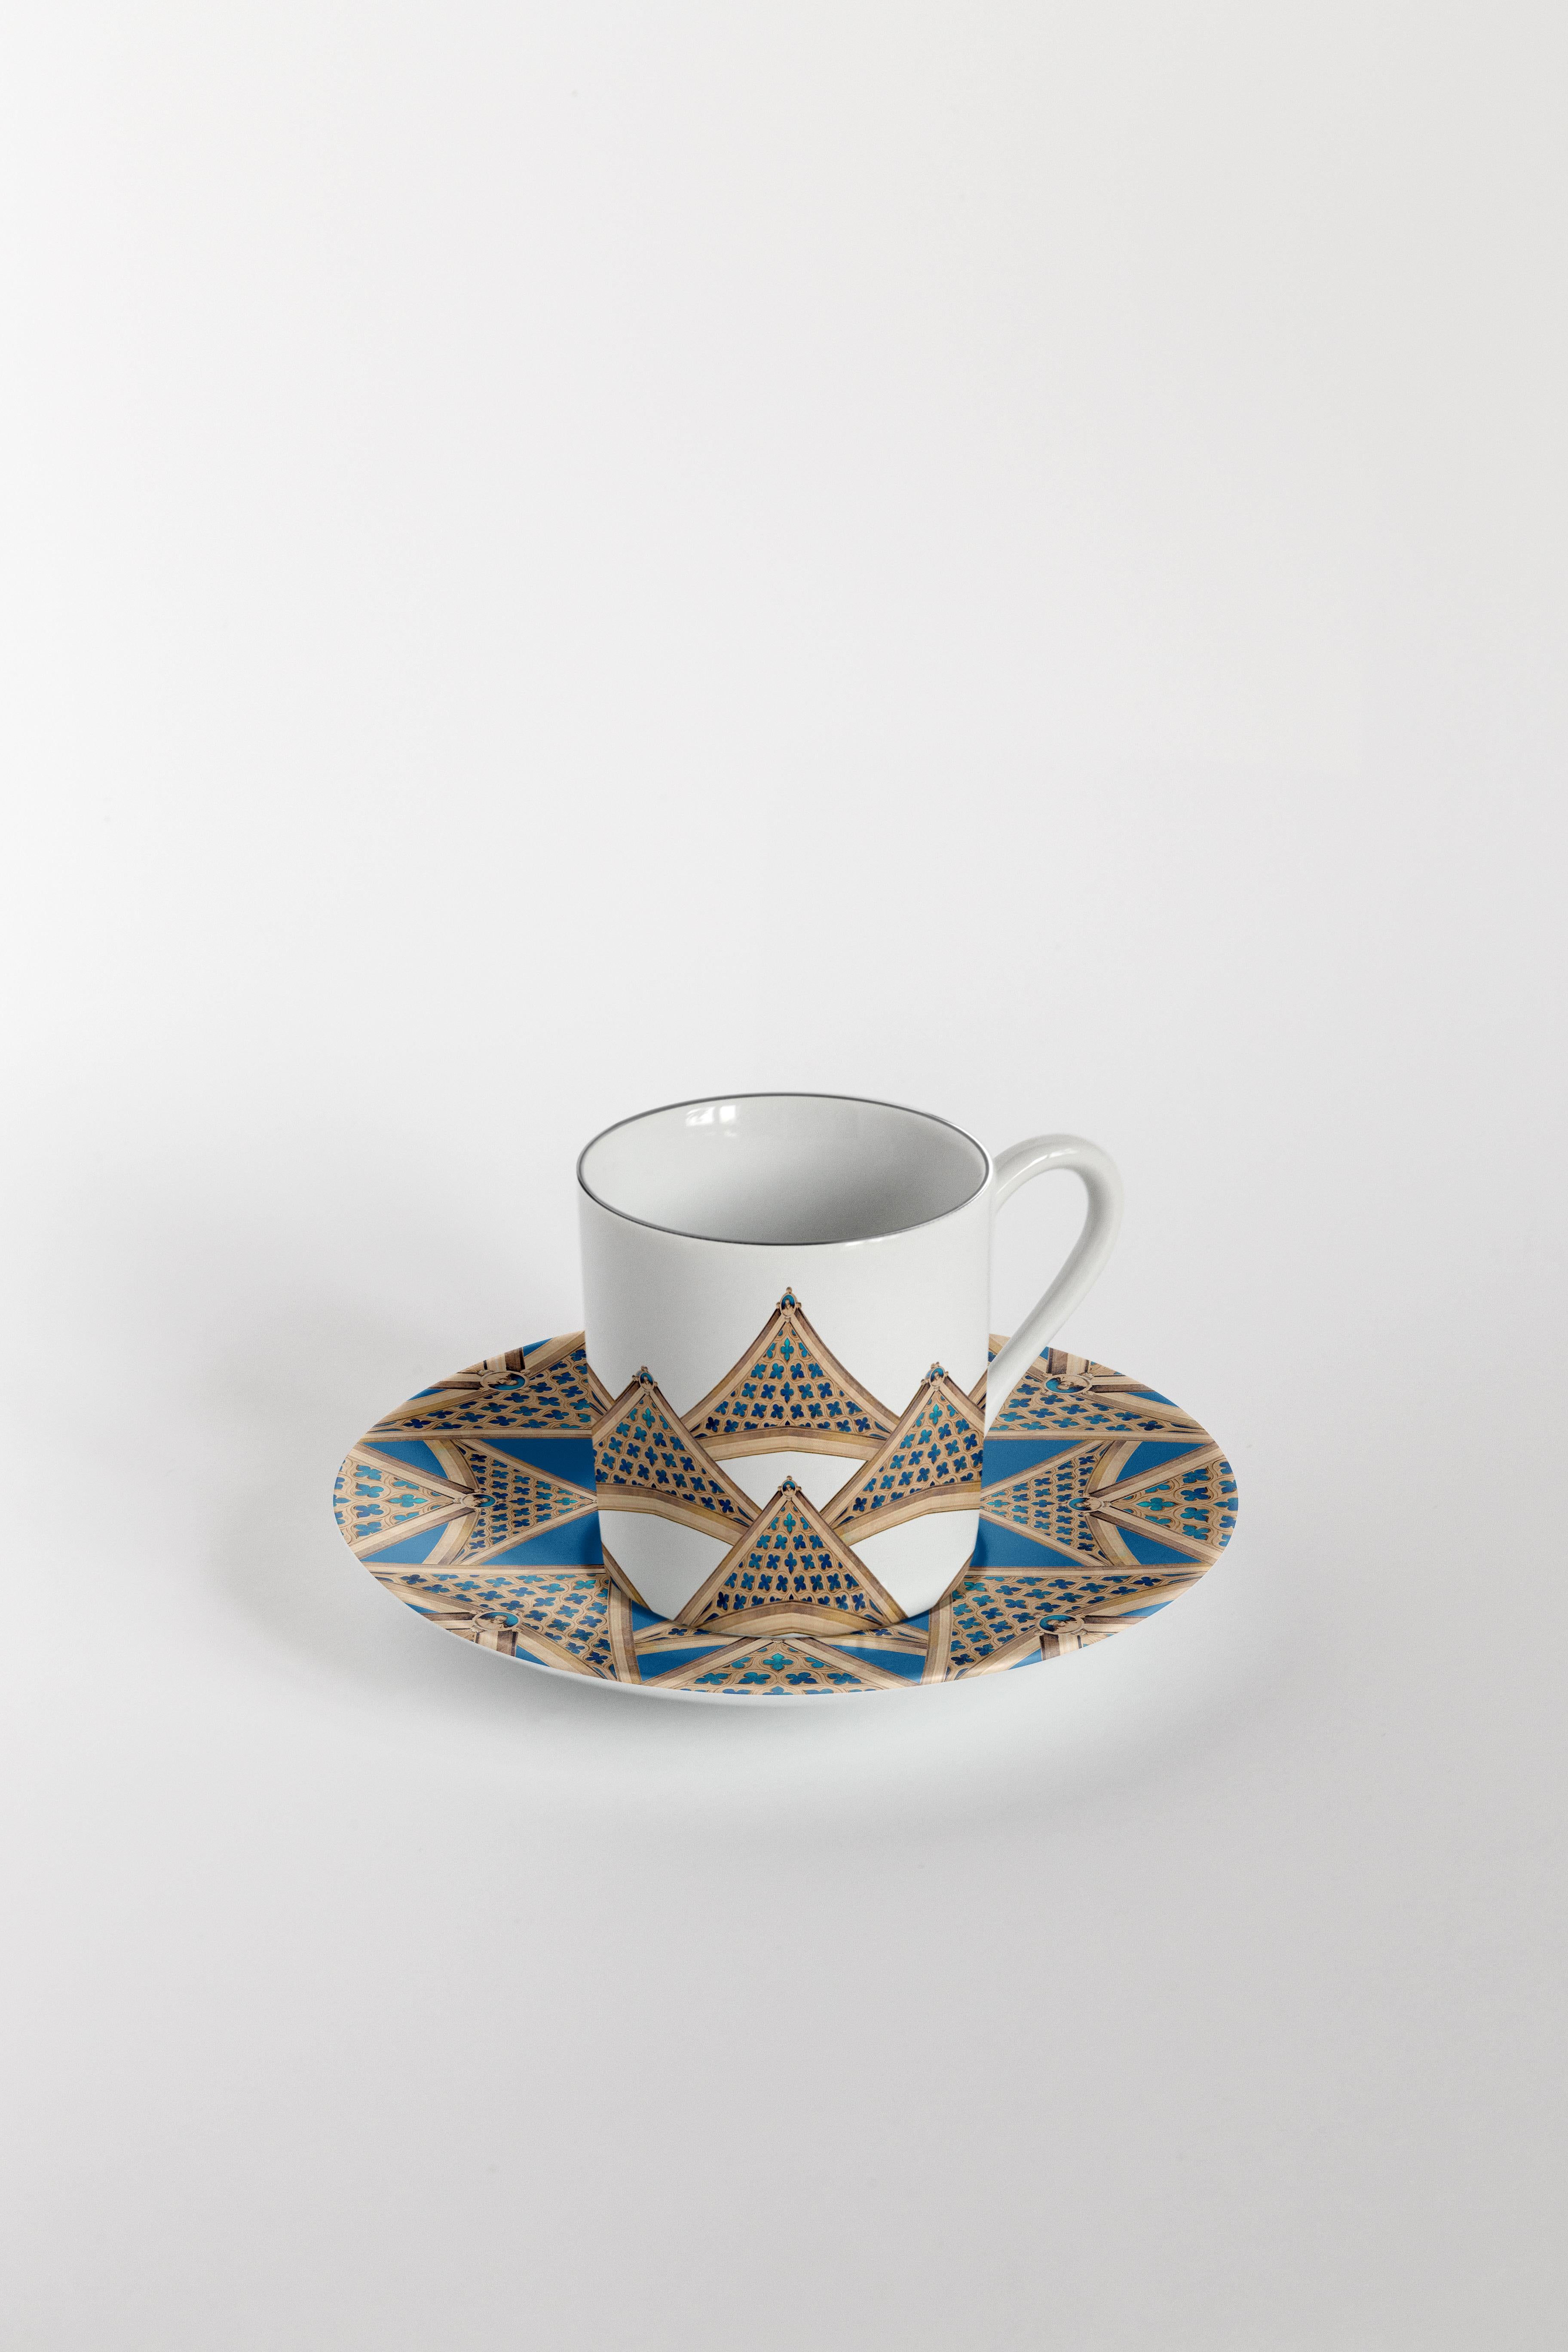 Le Volte Celesti, Six Contemporary Decorated Coffee Cups with Plates For Sale 1